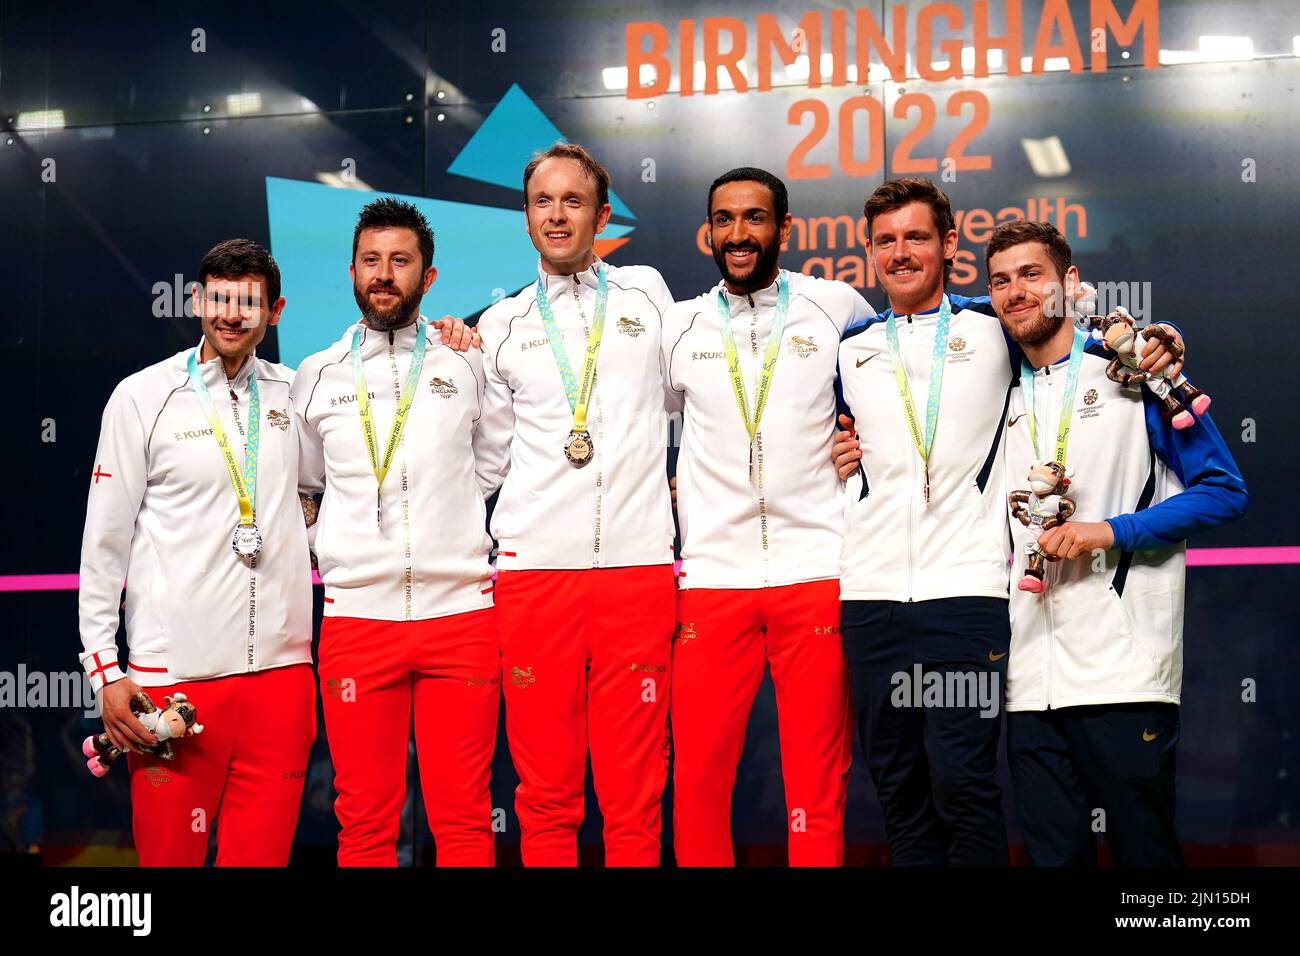 England's James Willstrop and Declan James (centre) with the gold medal, England's Adrian Waller and Daryl Selby (left) with the silver medal and Scotland's Greg Lobban and Rory Stewart with the bronze medals after the Men's Squash Doubles Medal match at the University of Birmingham Hockey and Squash Centre on day eleven of the 2022 Commonwealth Games in Birmingham. Picture date: Monday August 8, 2022. Stock Photo